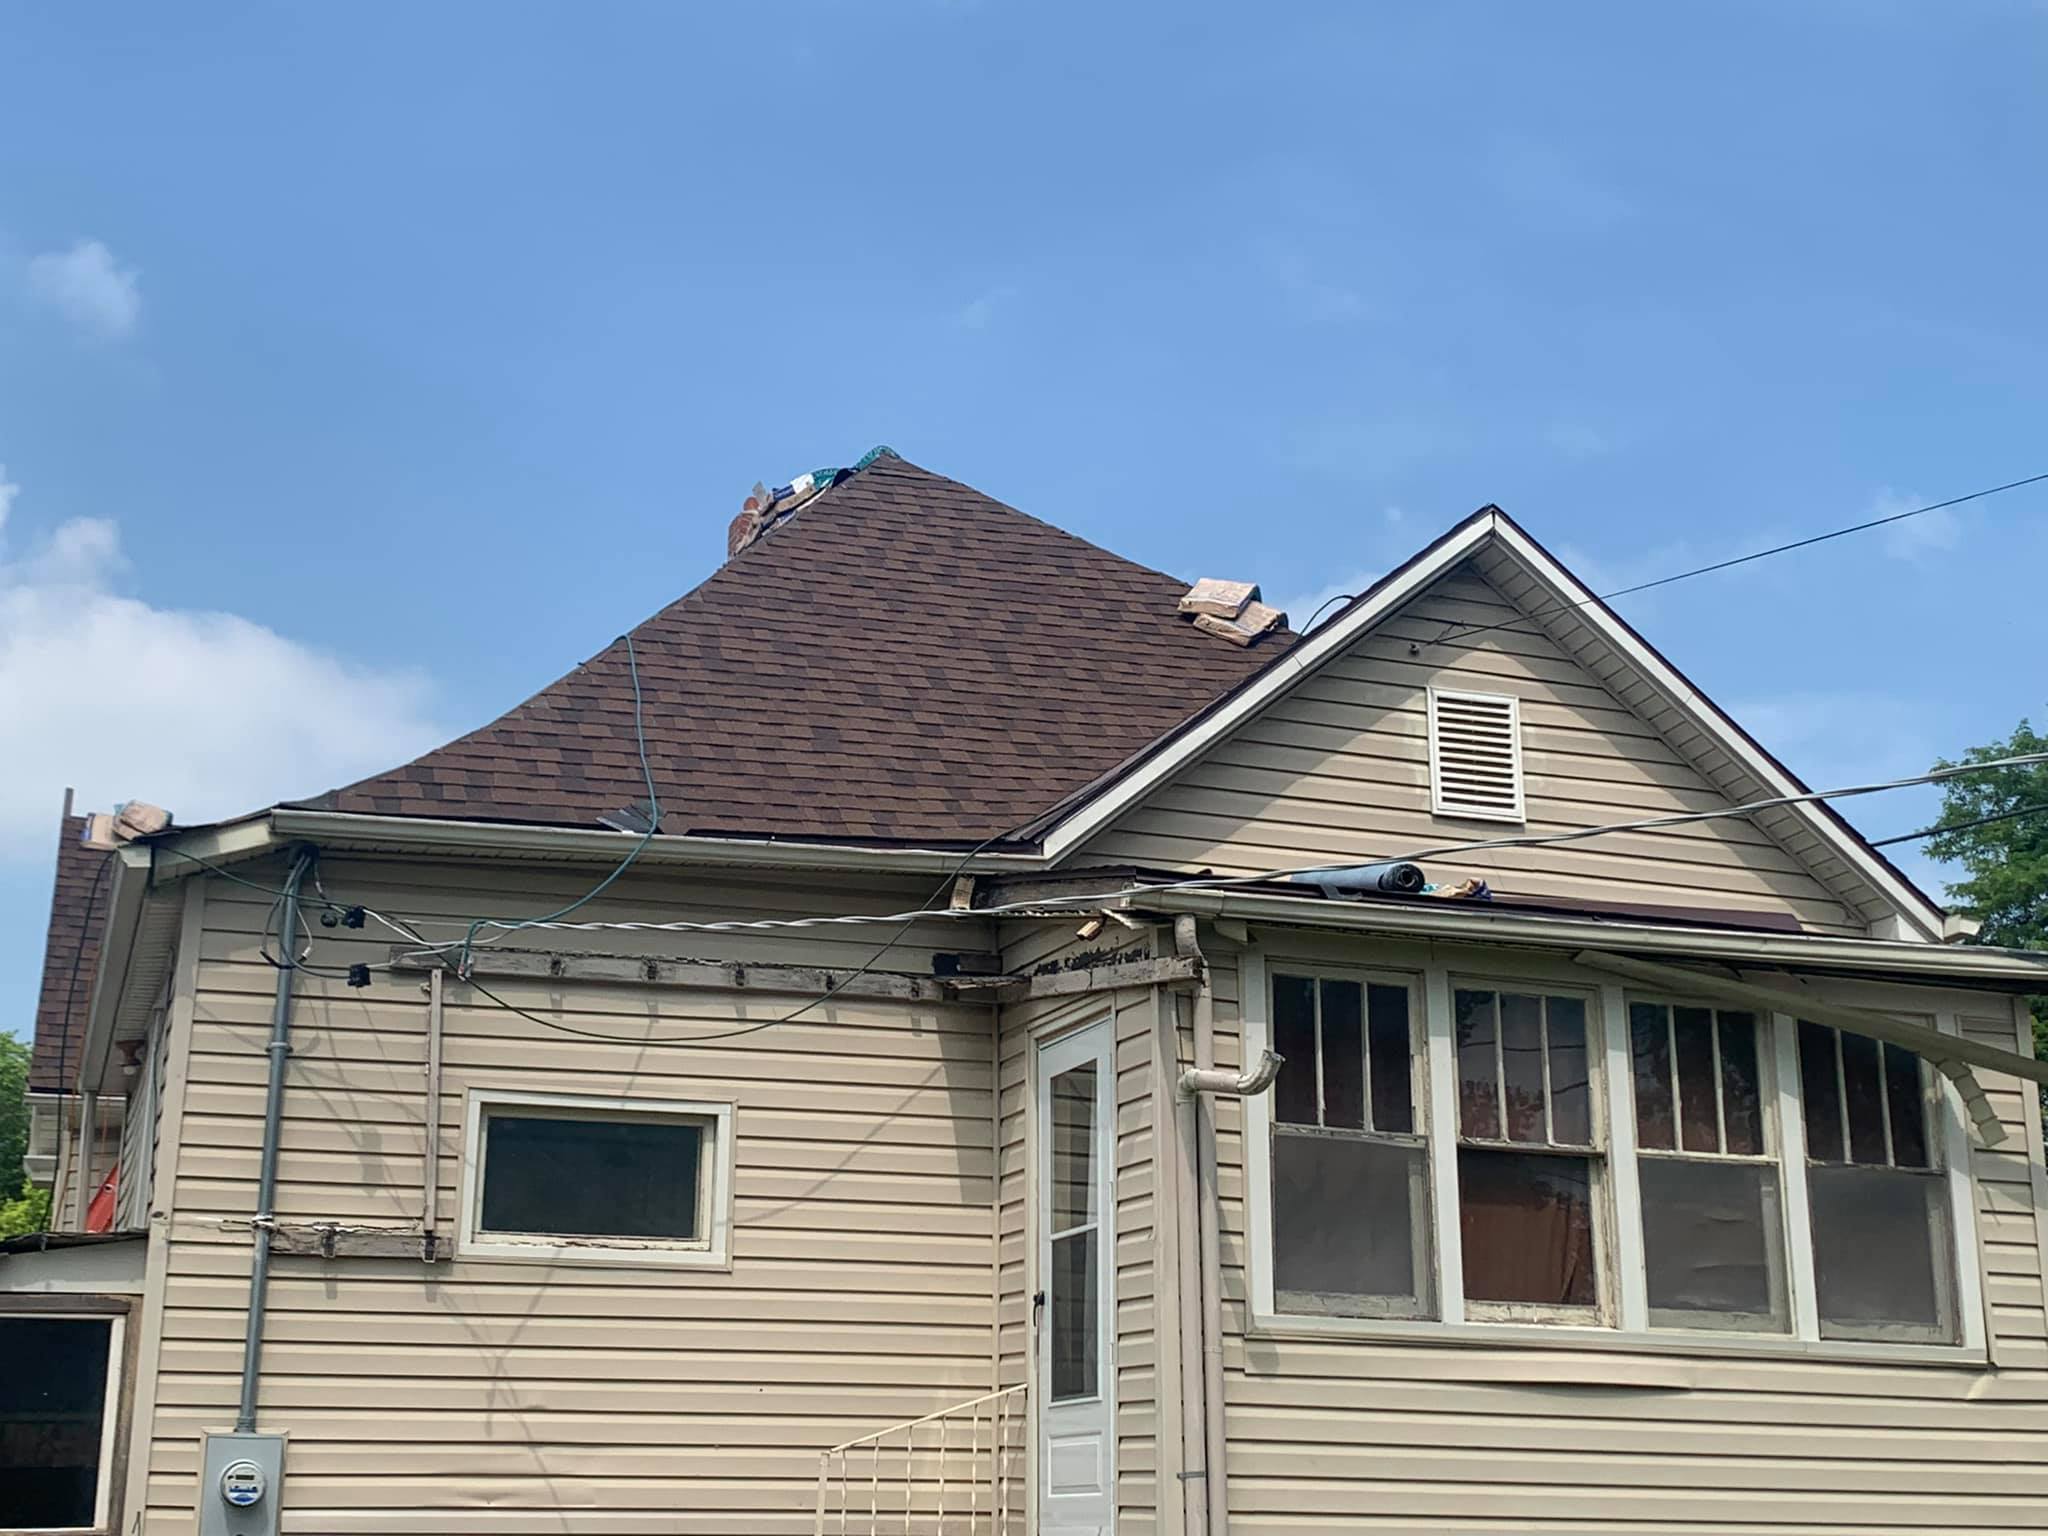 Roofing Companies Near Atchison Kansas - Questions To Ask